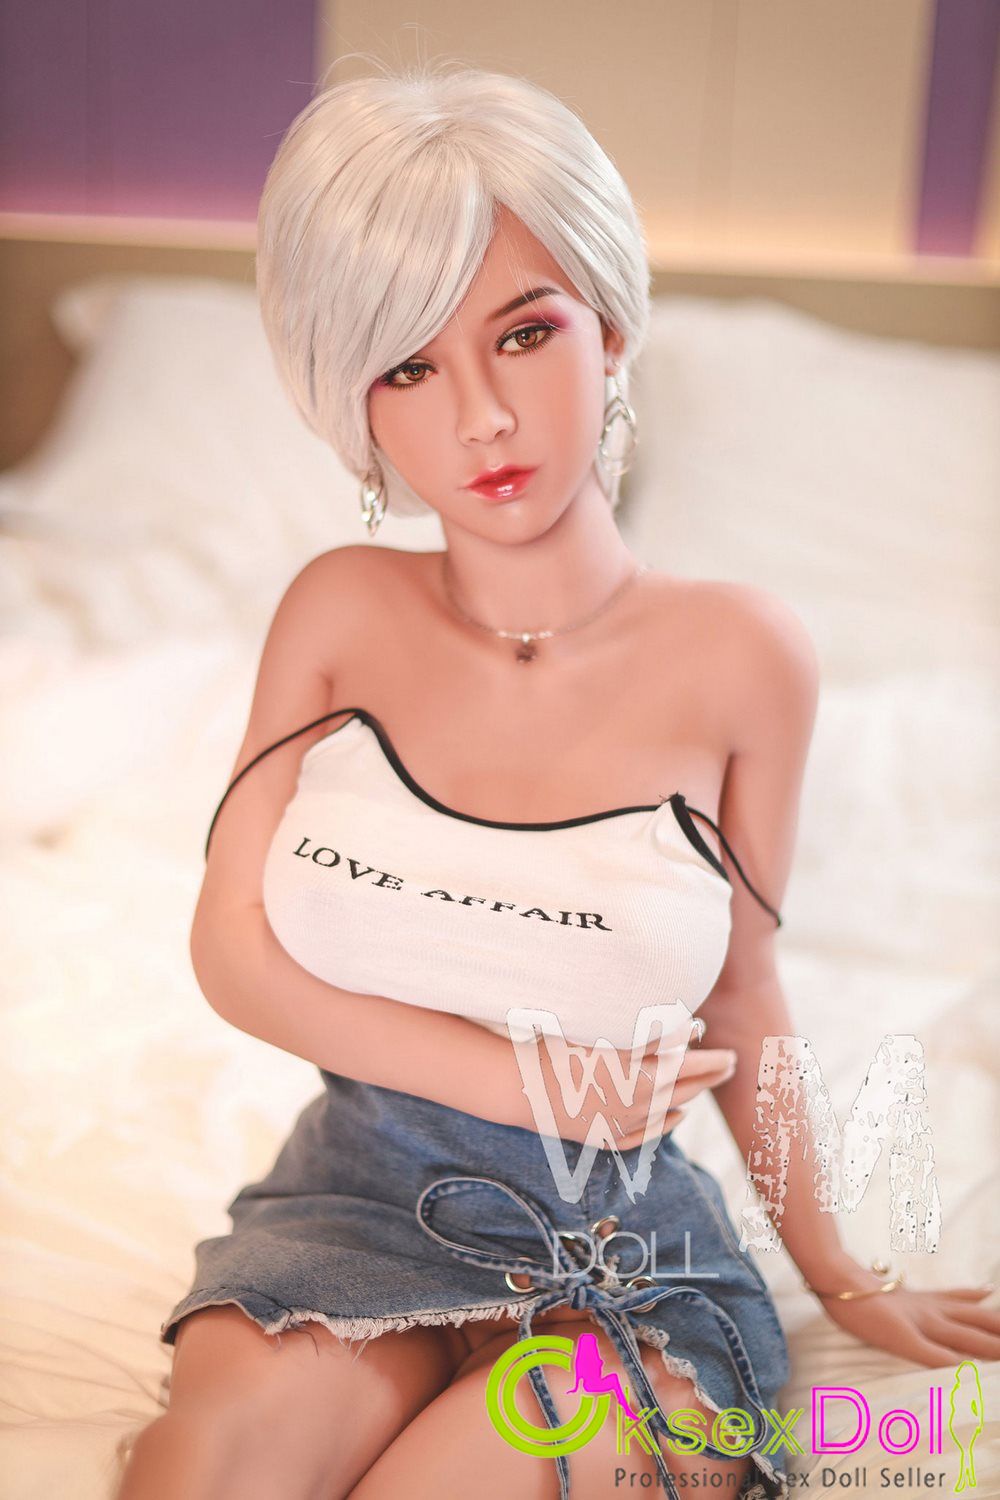 Japanese Young real doll Photos